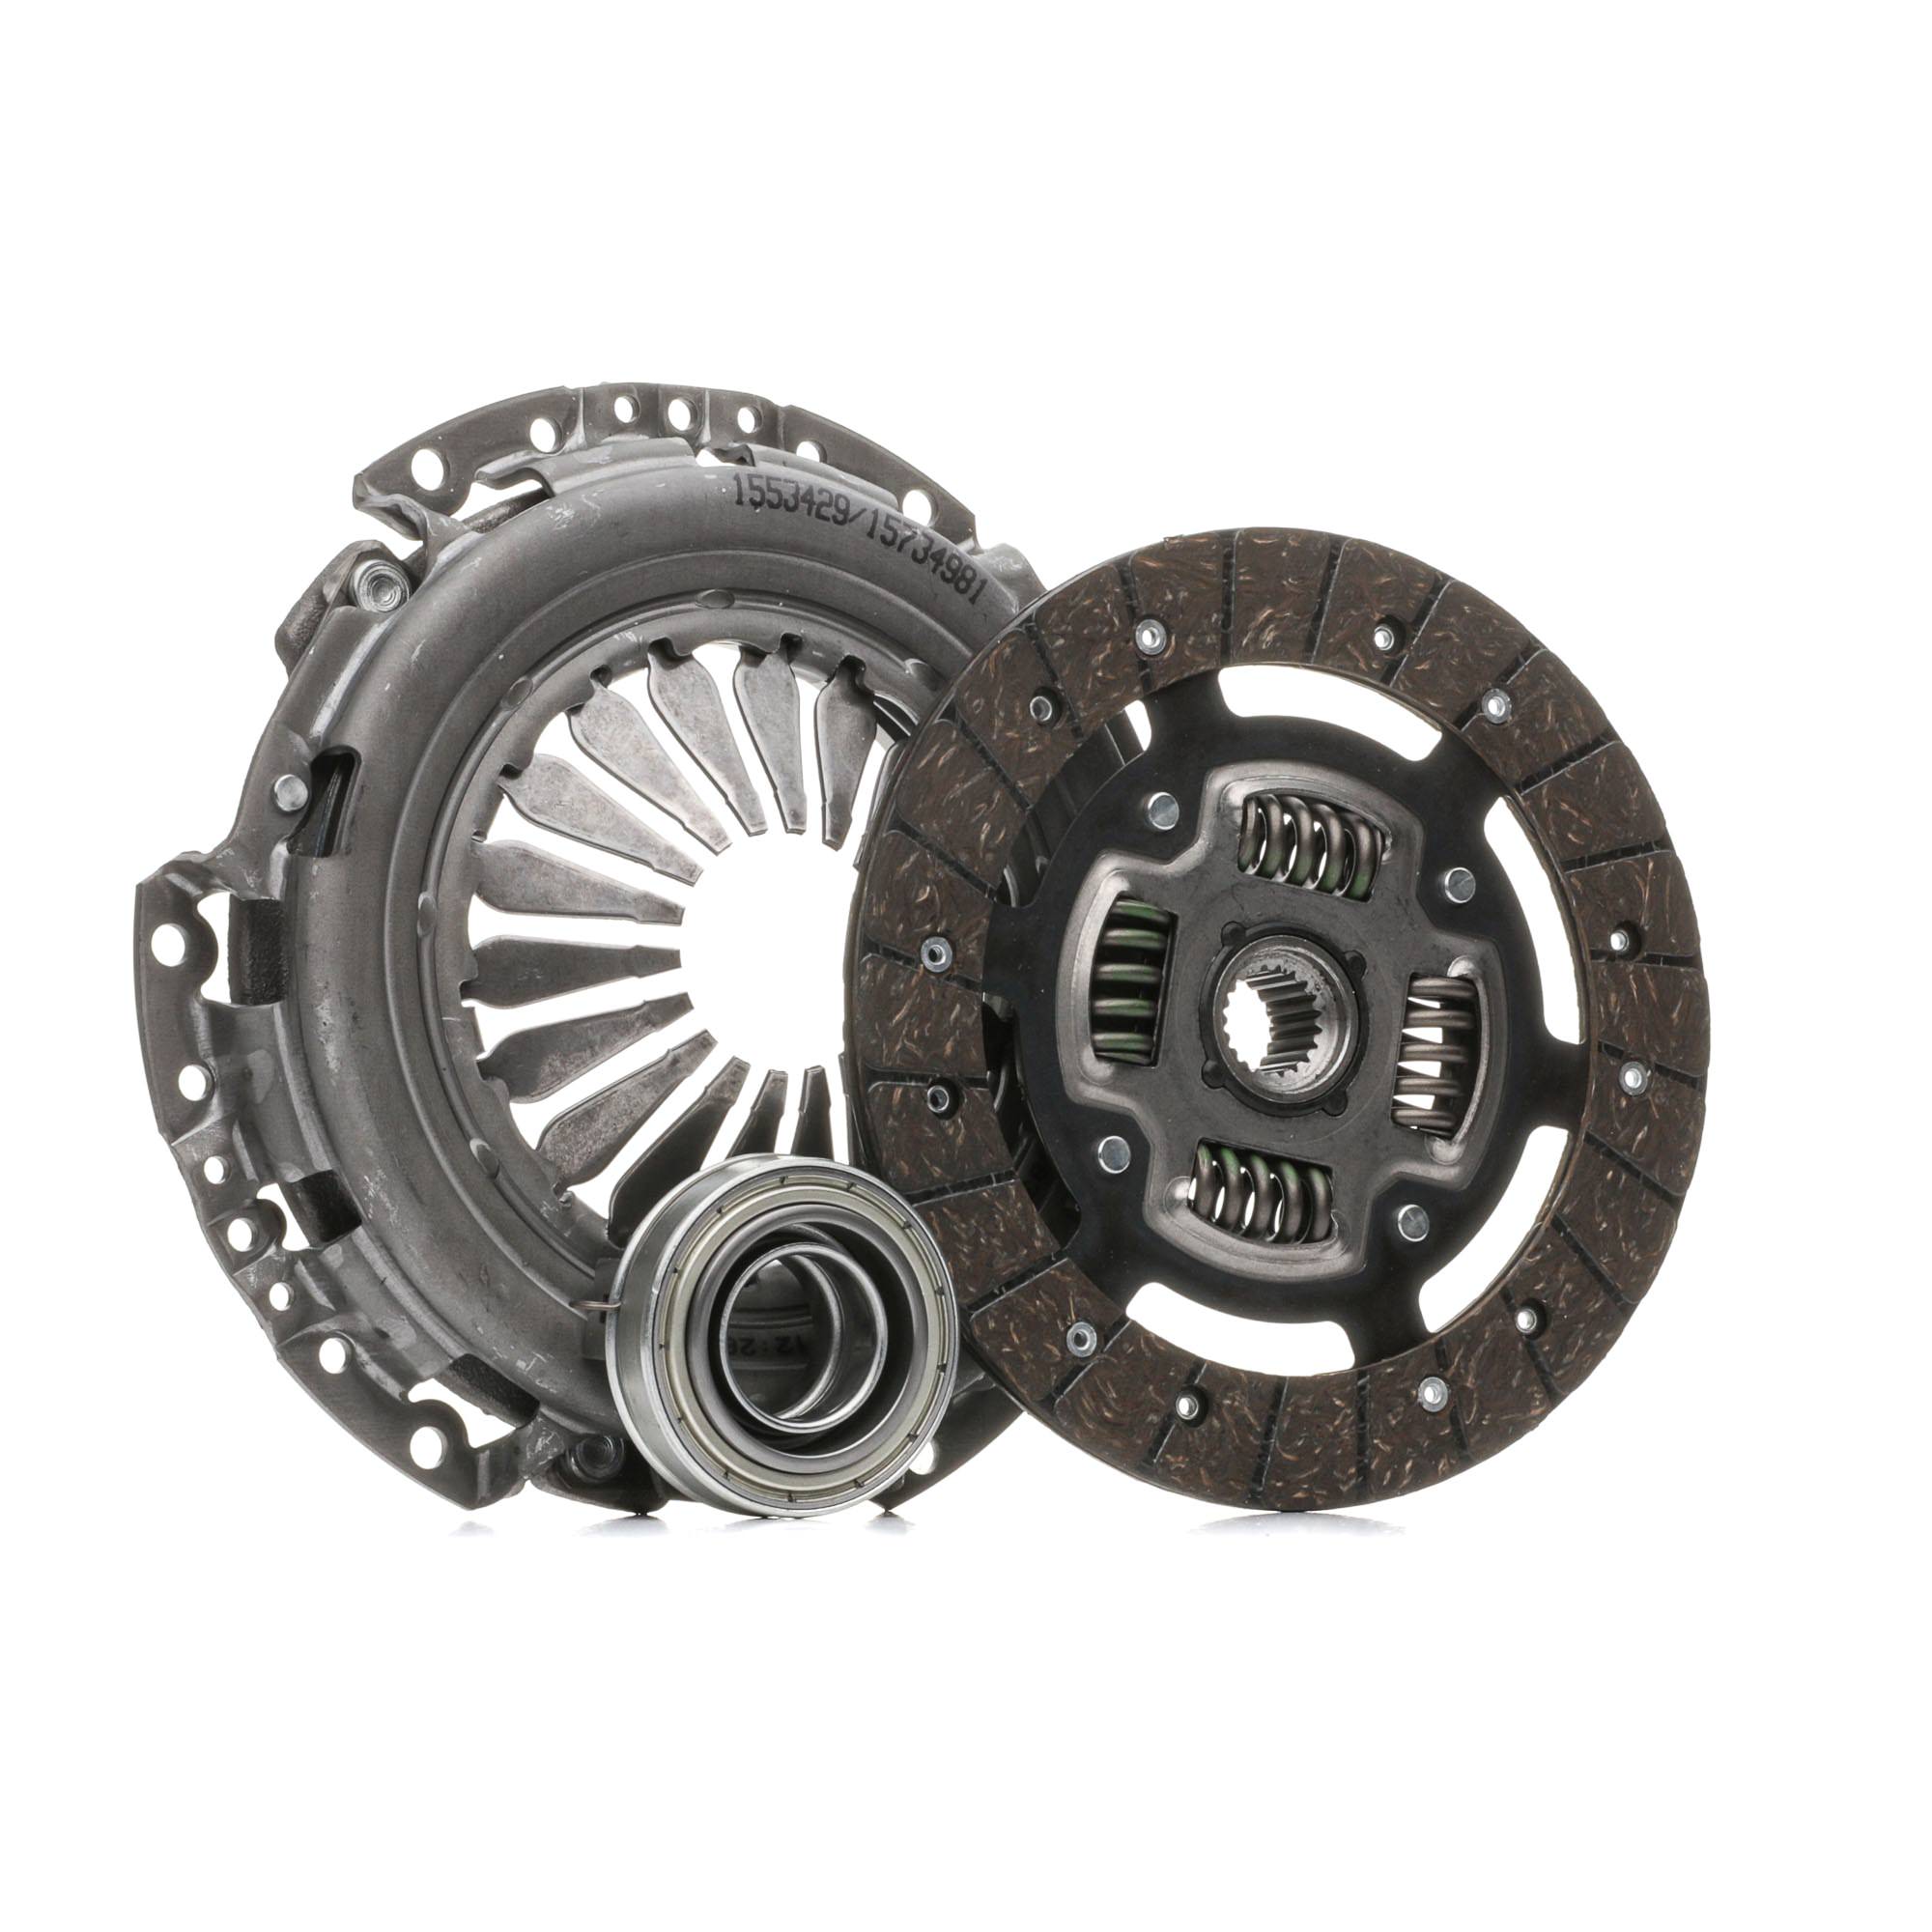 RIDEX 479C0736 Clutch kit with clutch release bearing, with clutch disc, 200mm